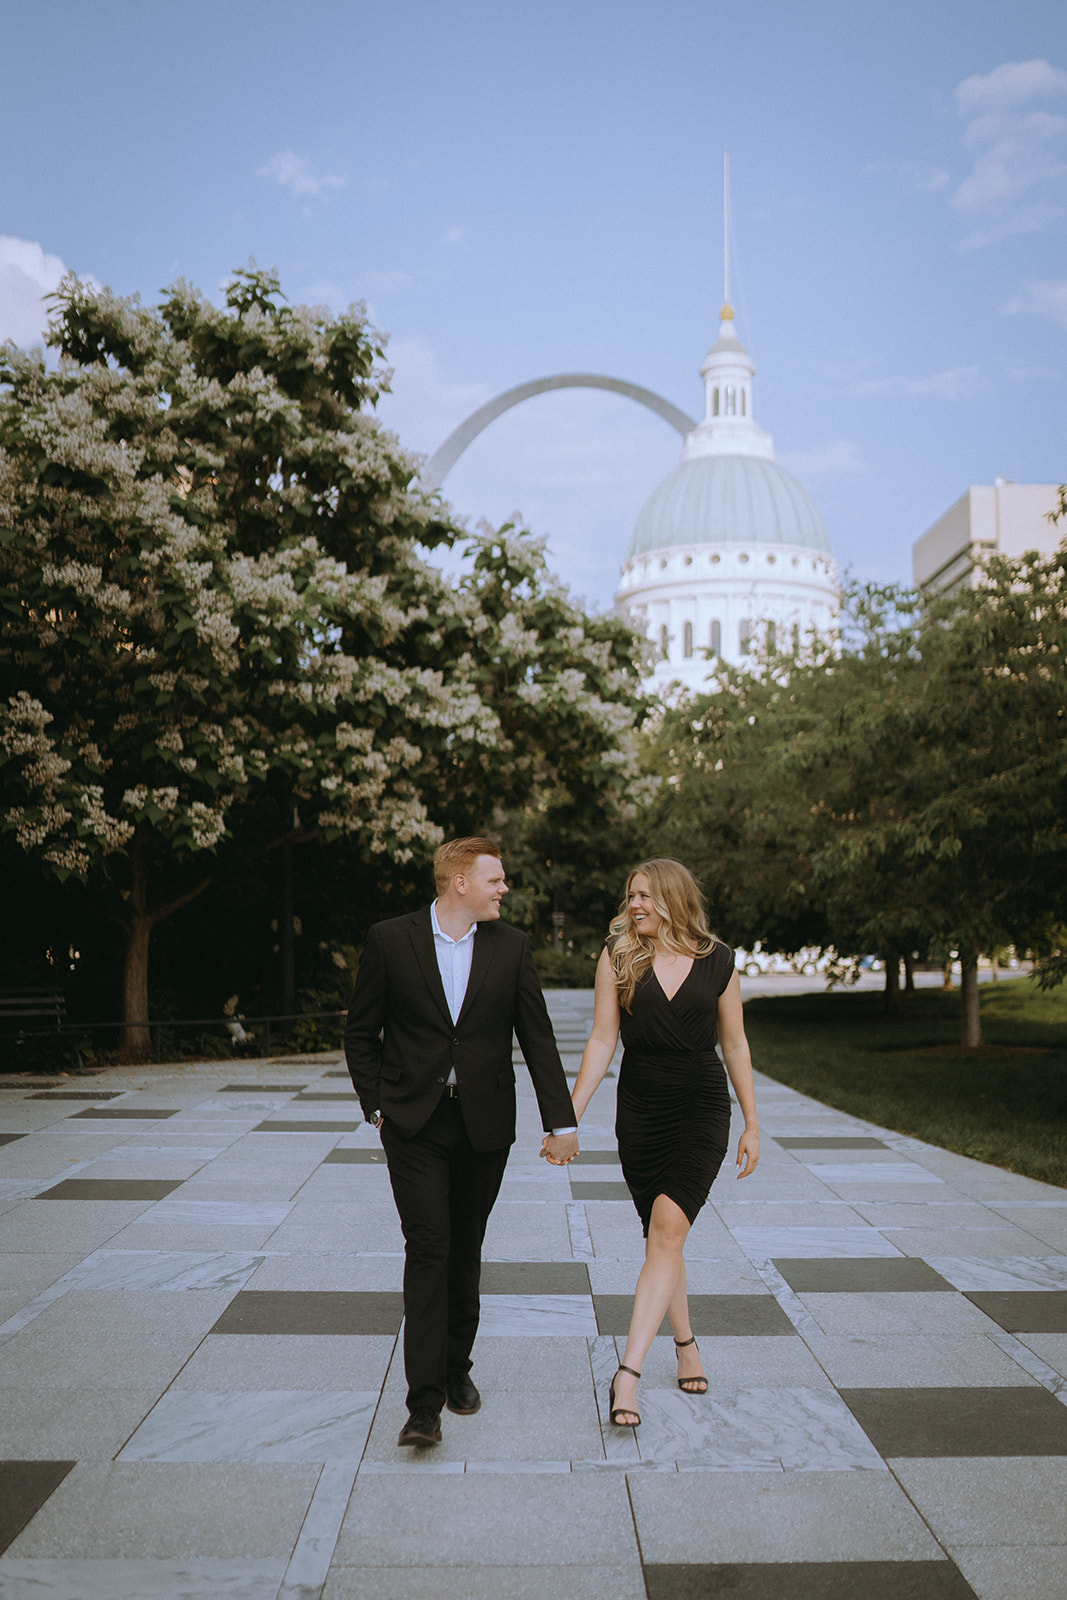 St. Louis Engagement Session at The Last Hotel + Union Station